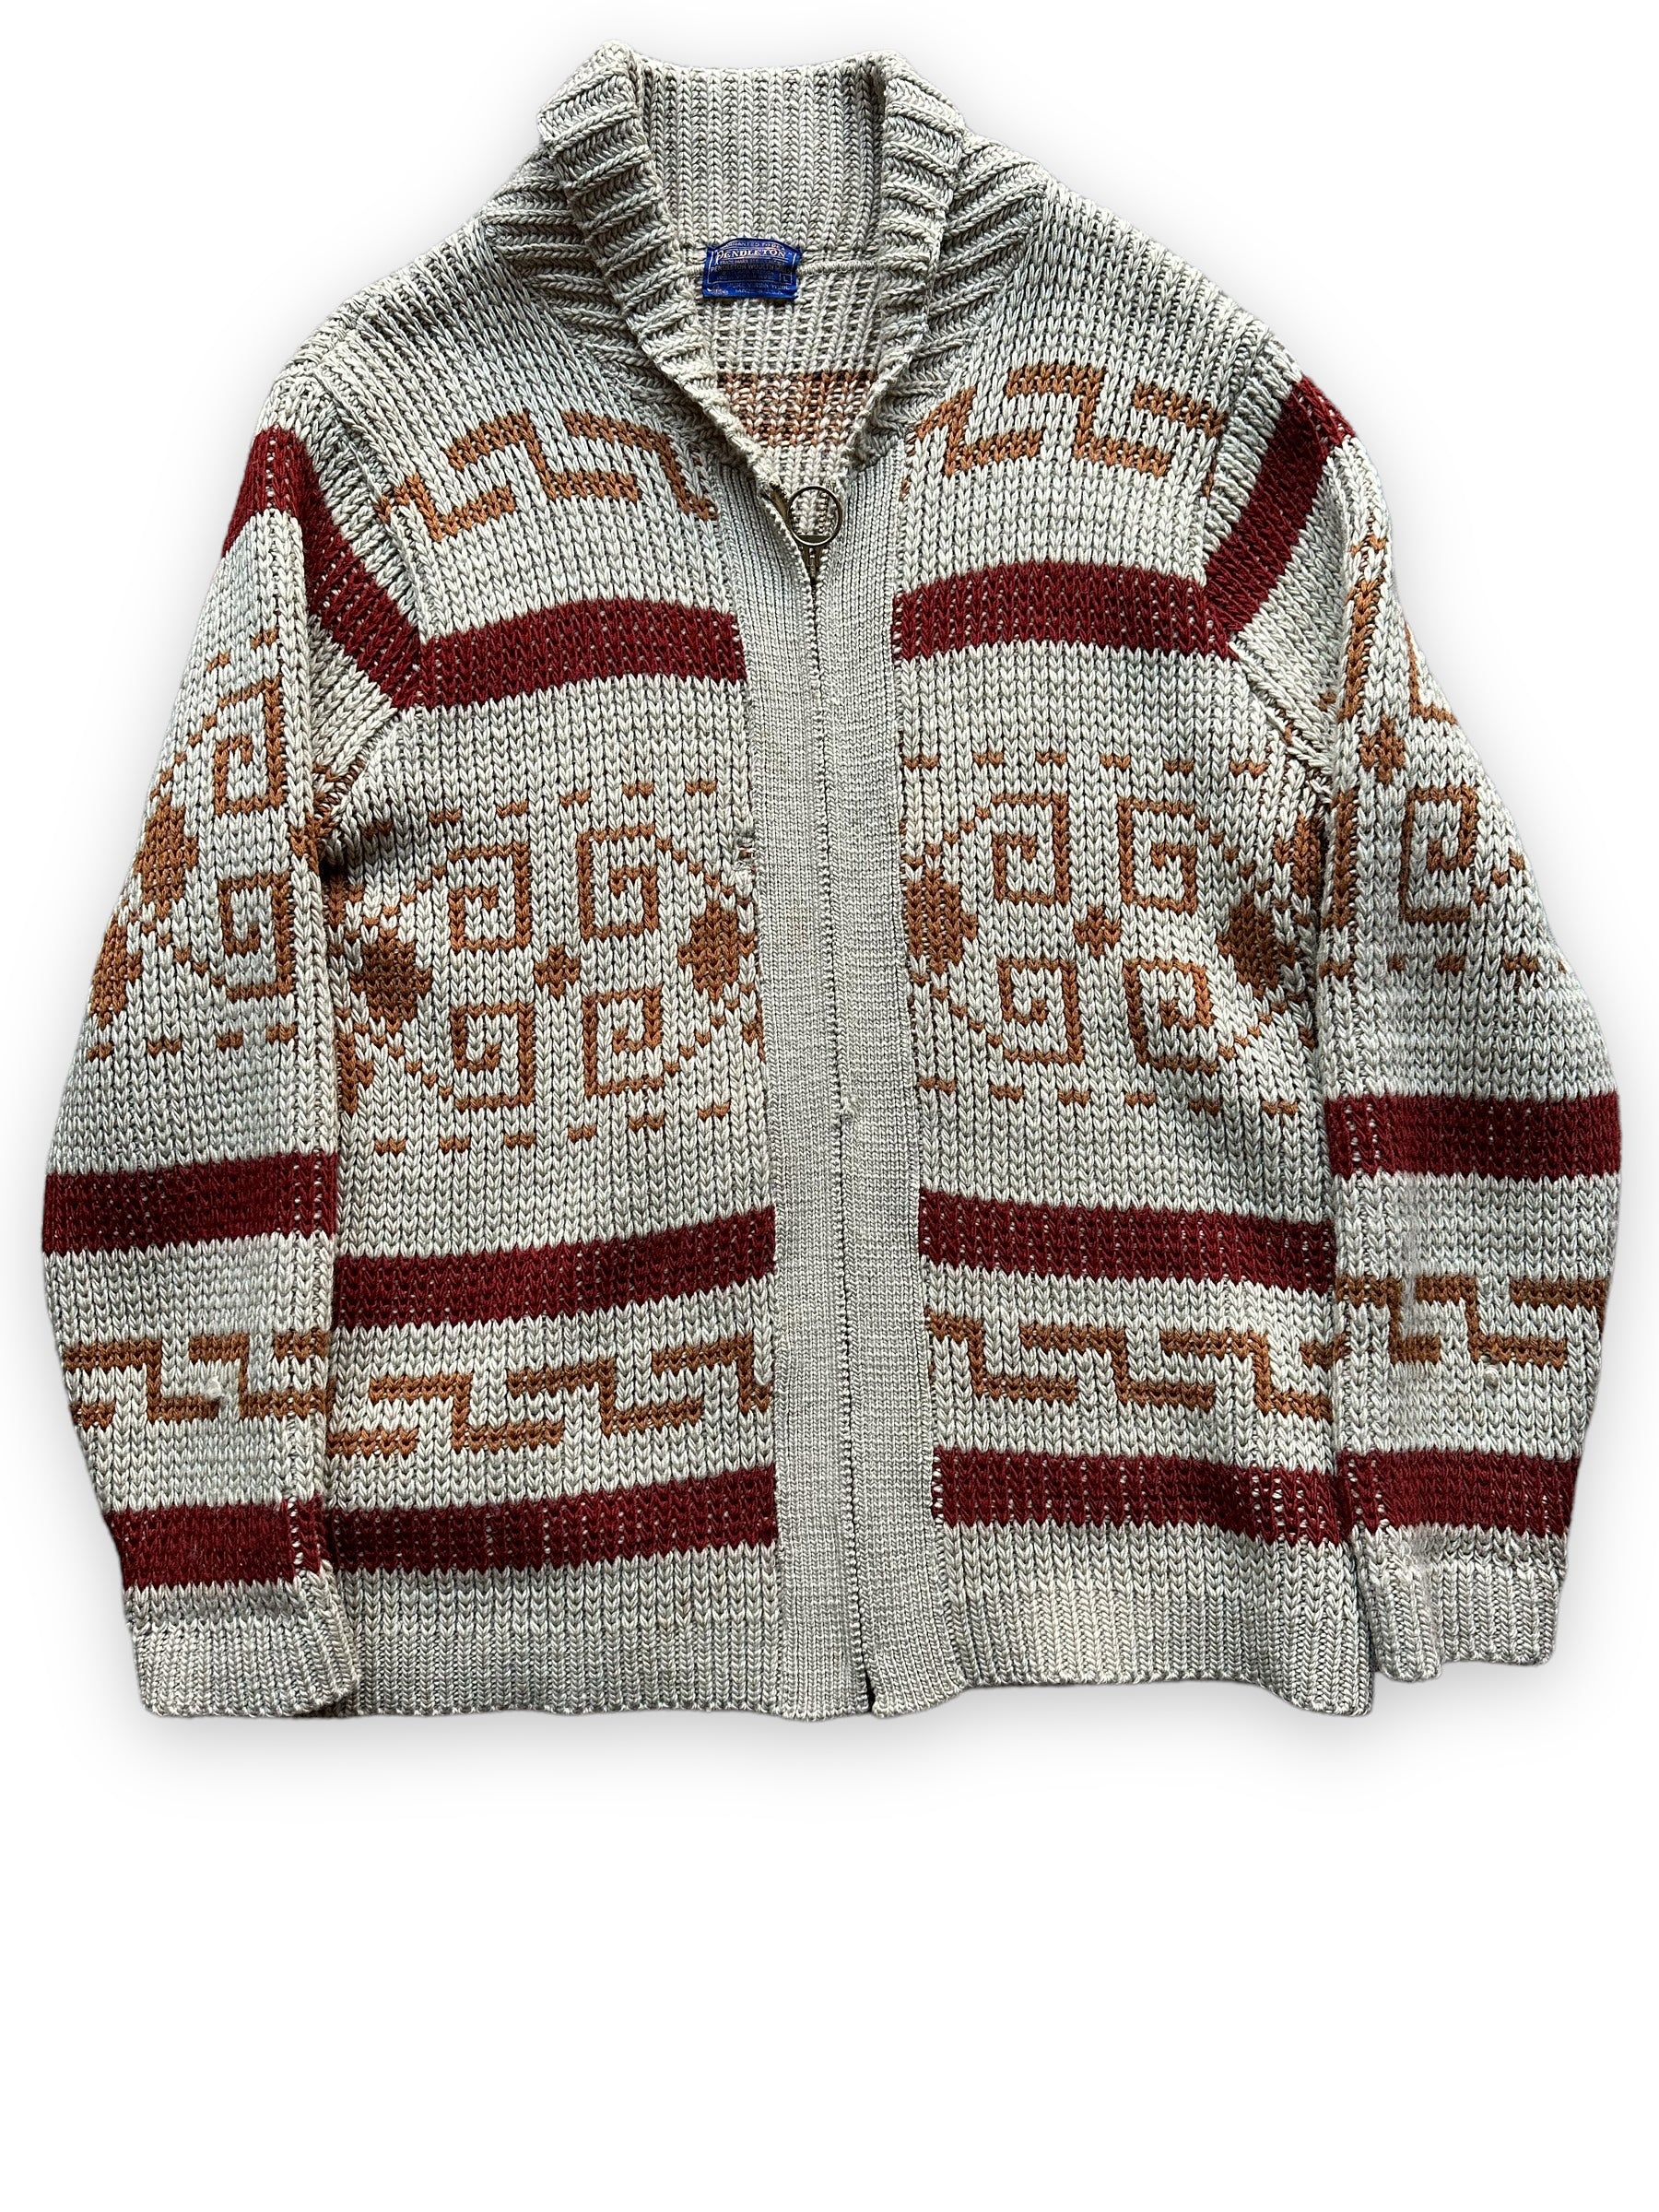 Front Flat Lay View of Vintage Pendleton Westerley "The Dude" Sweater SZ L |  Vintage Big Lebowski Pendleton Sweaters Seattle | Barn Owl Vintage Seattle